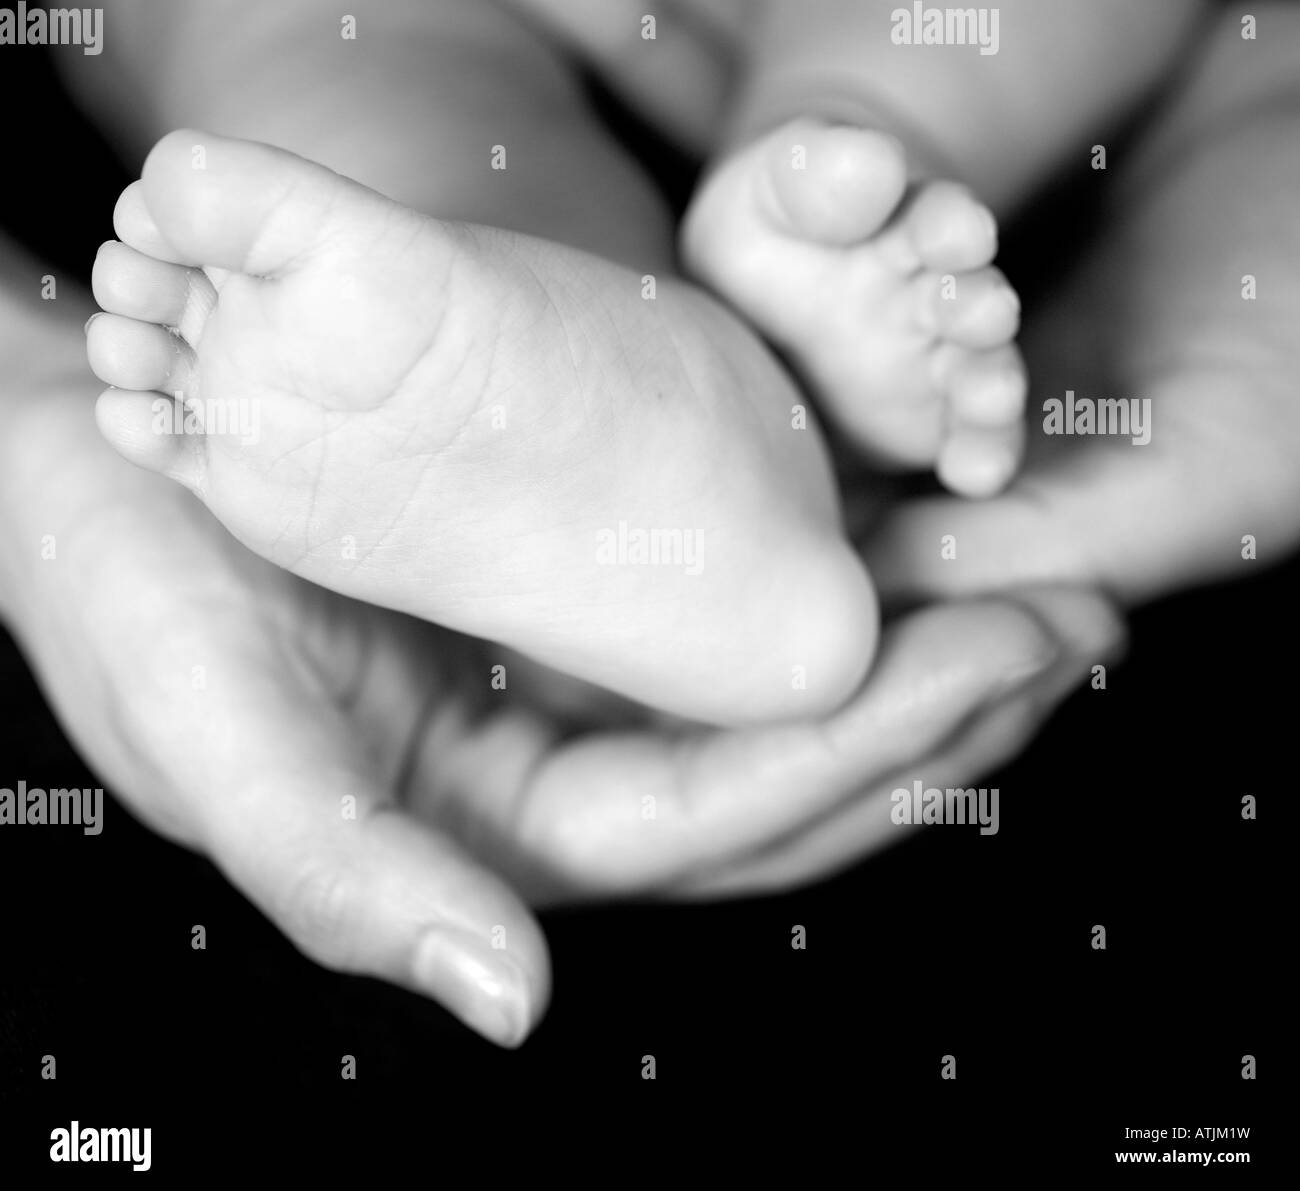 Baby feet and parents' hands. Stock Photo